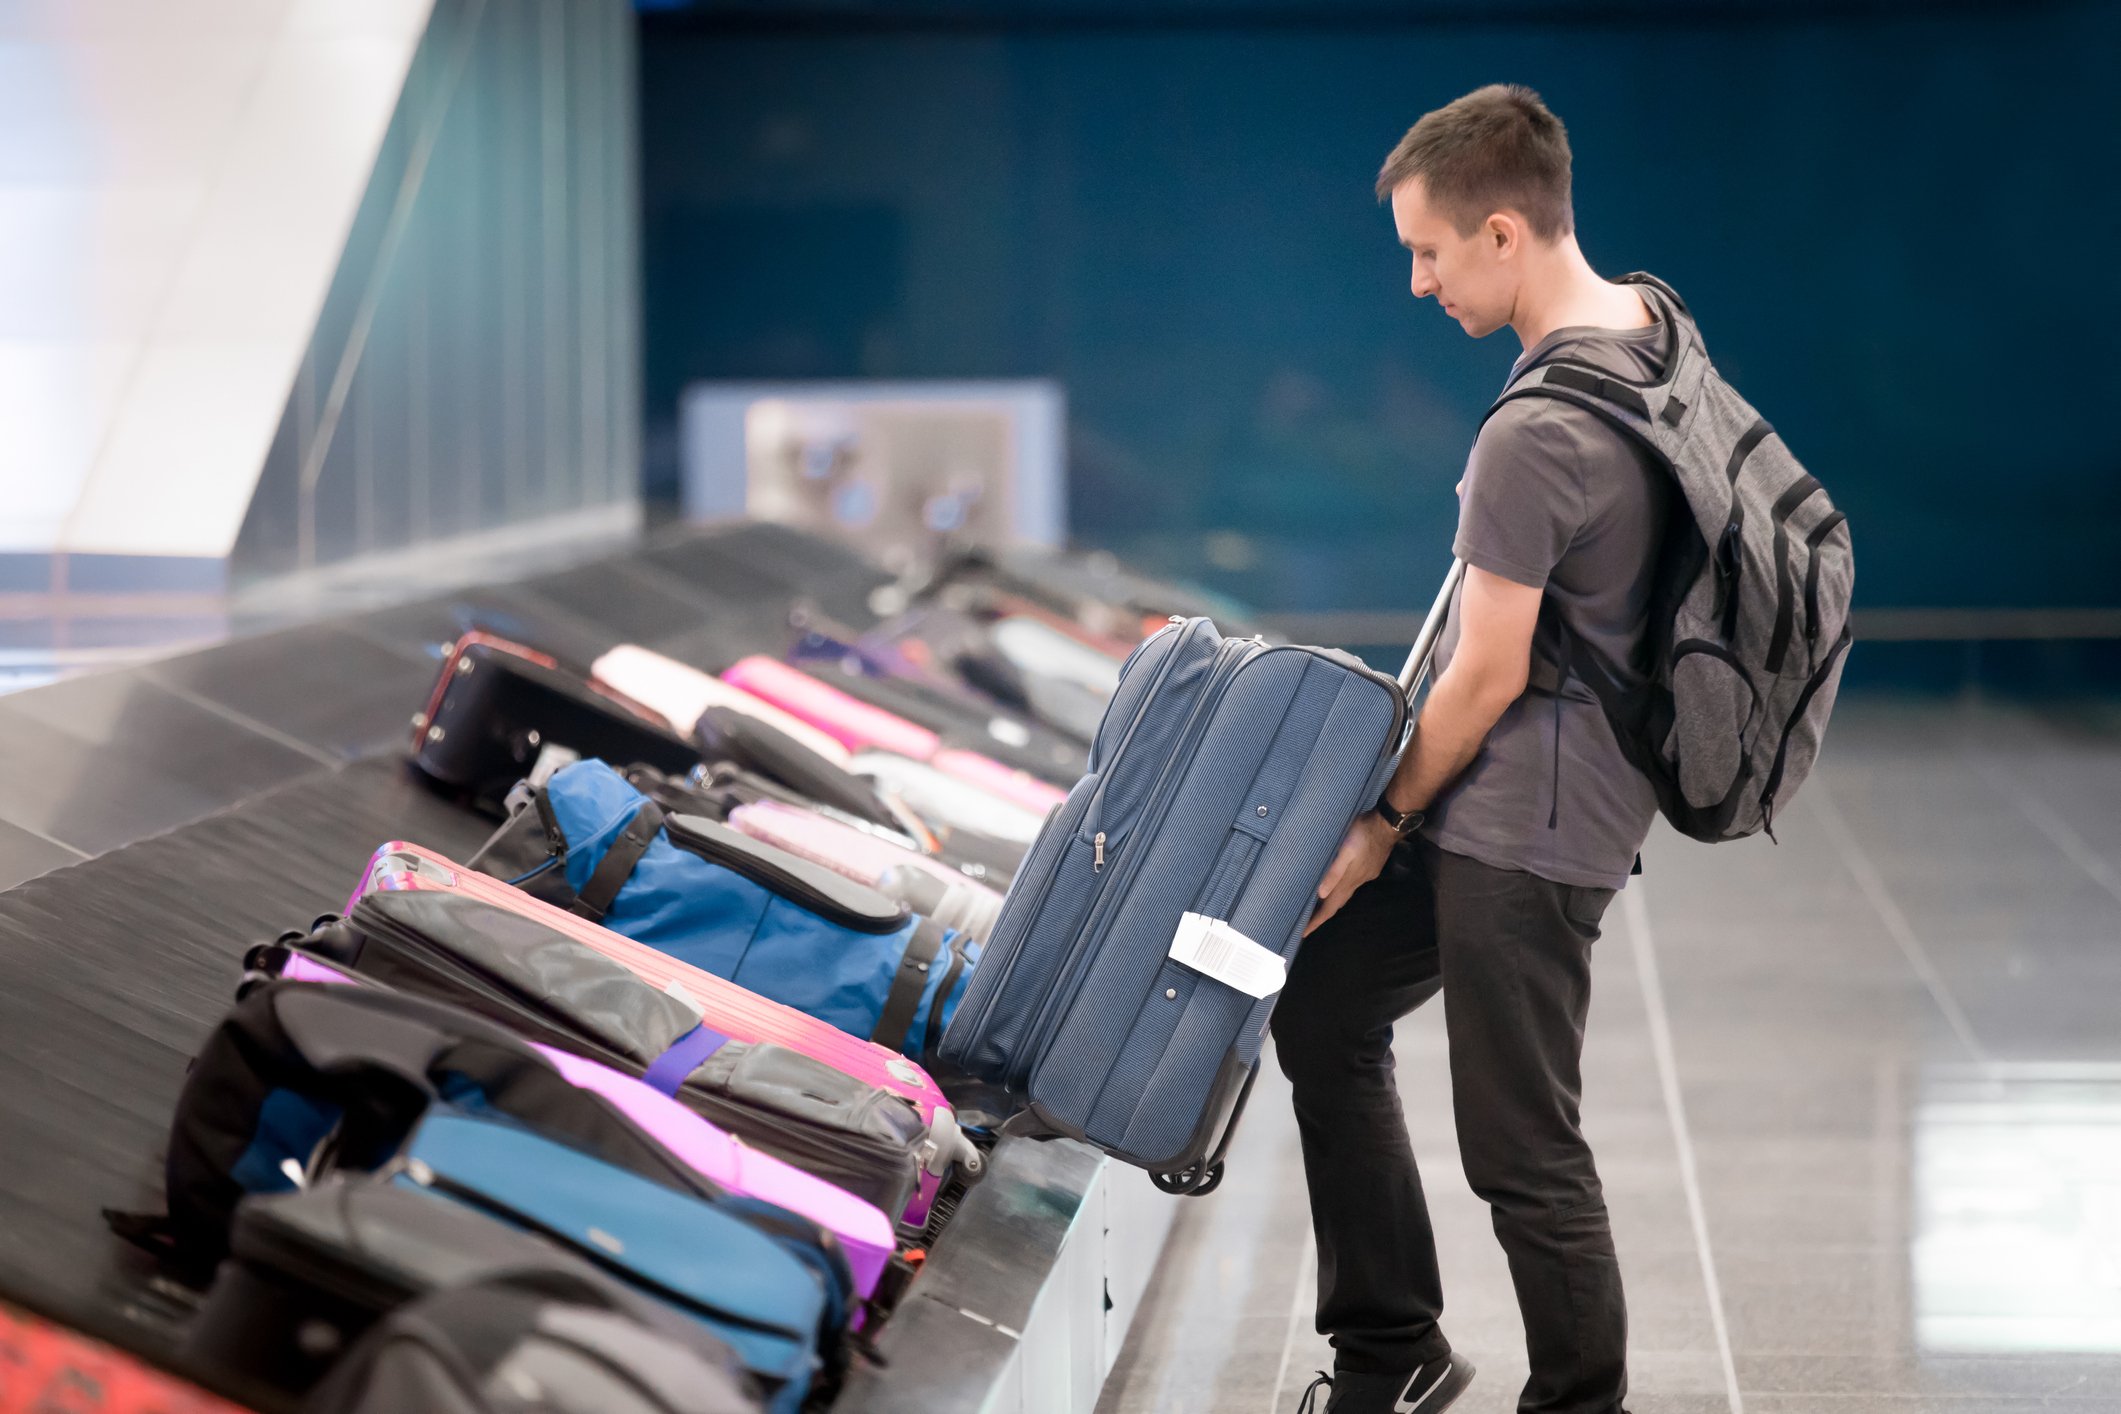 Should you bring carry on or checked luggage?